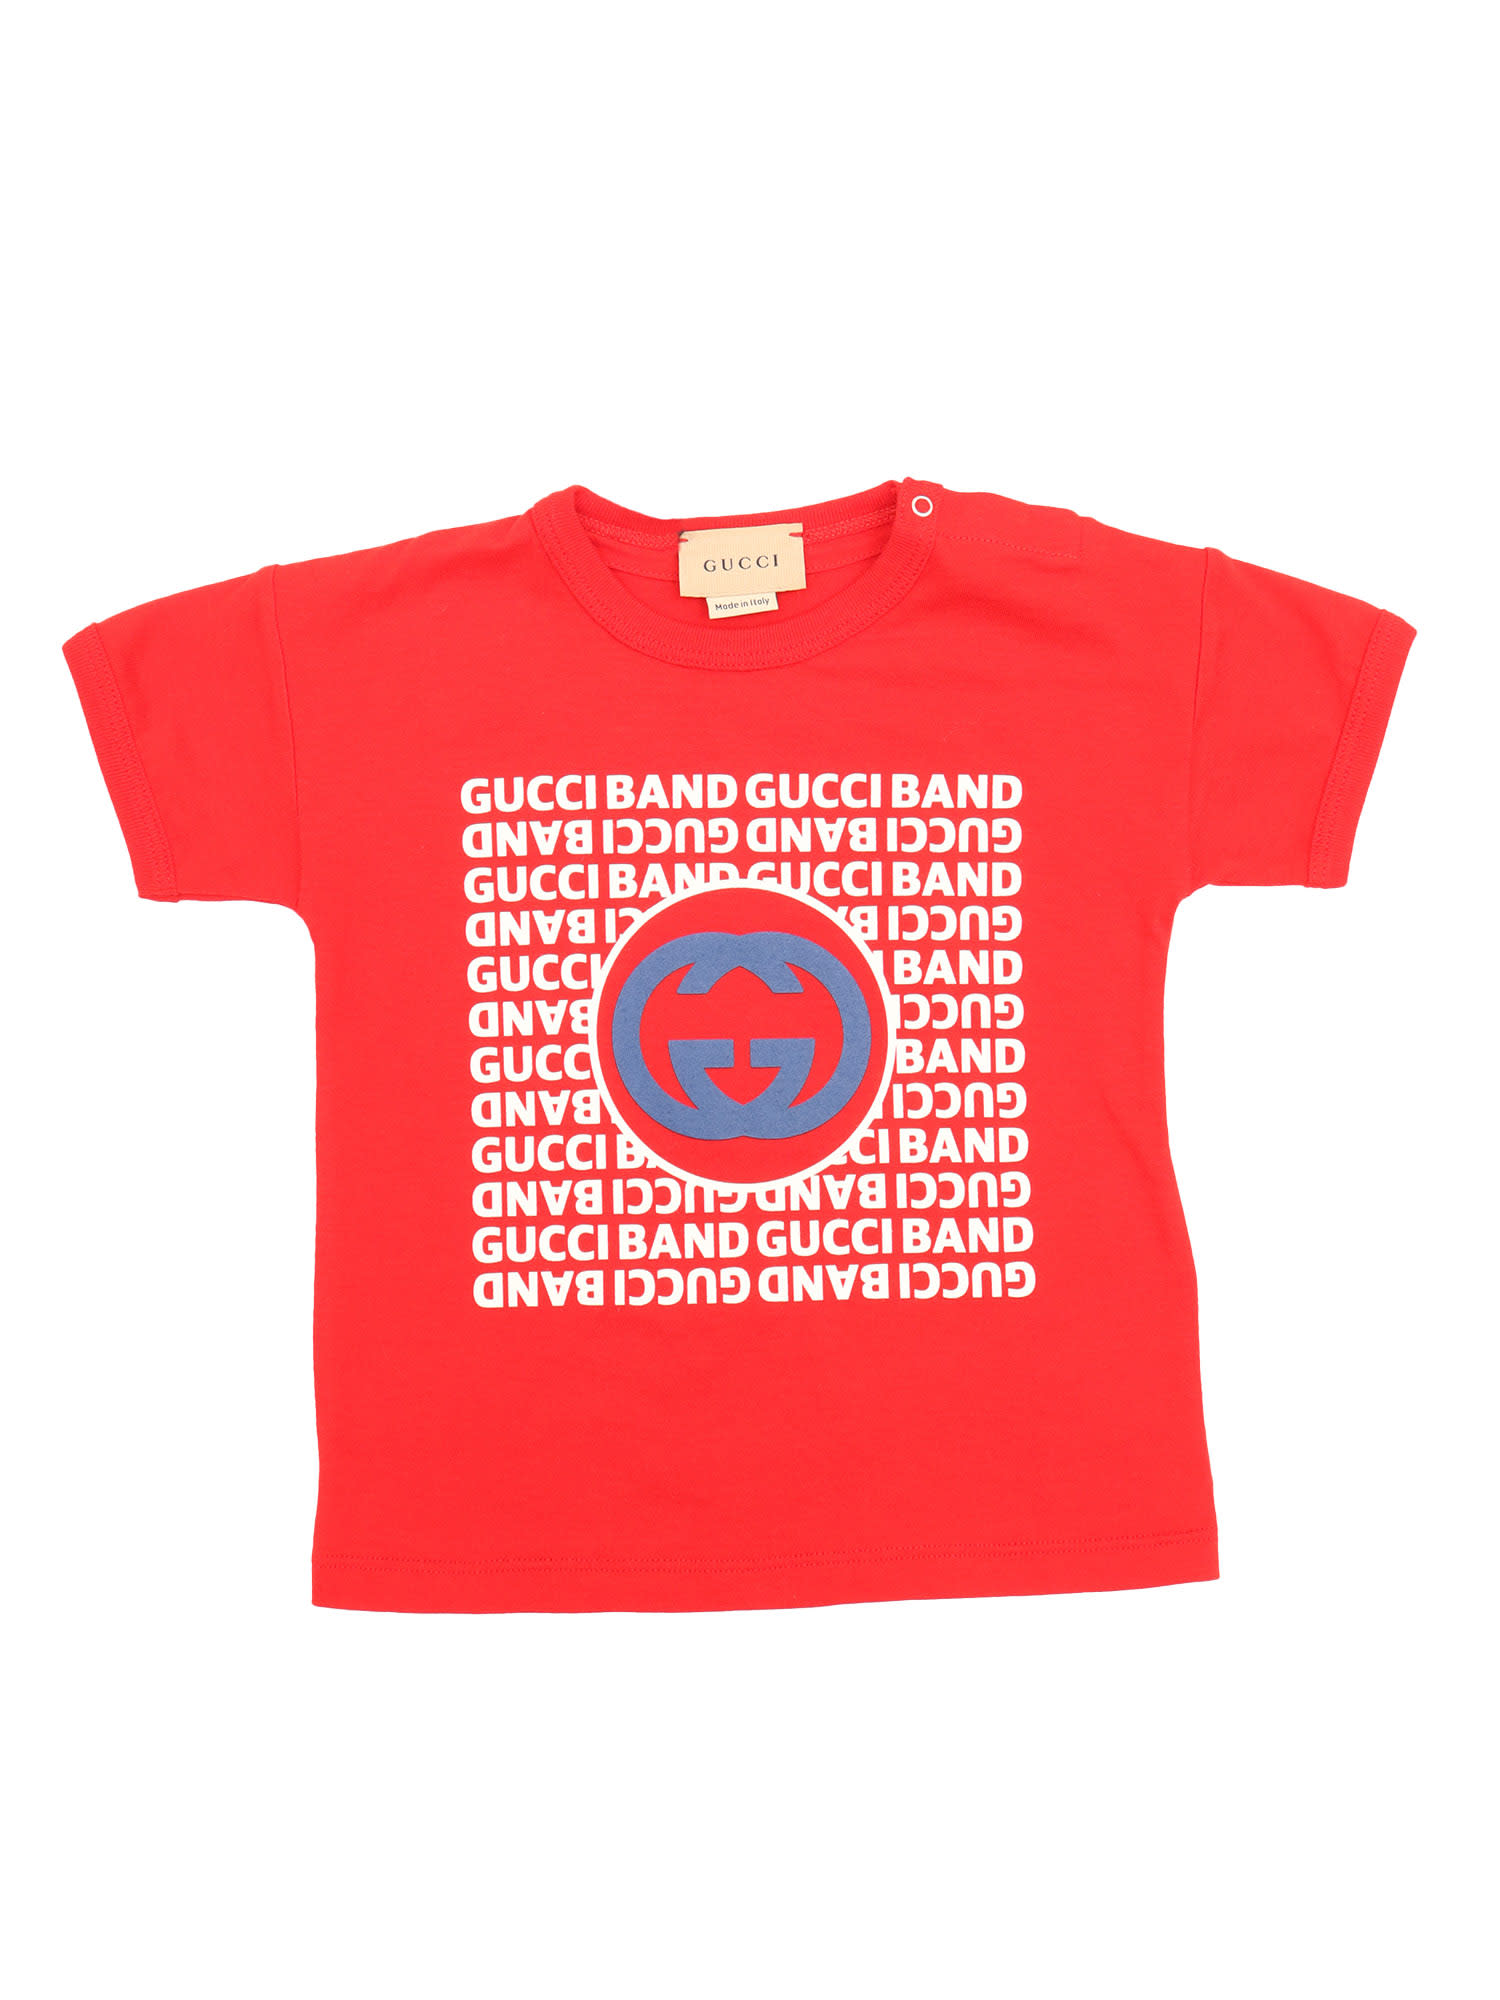 GUCCI LOGO T-SHIRT IN RED